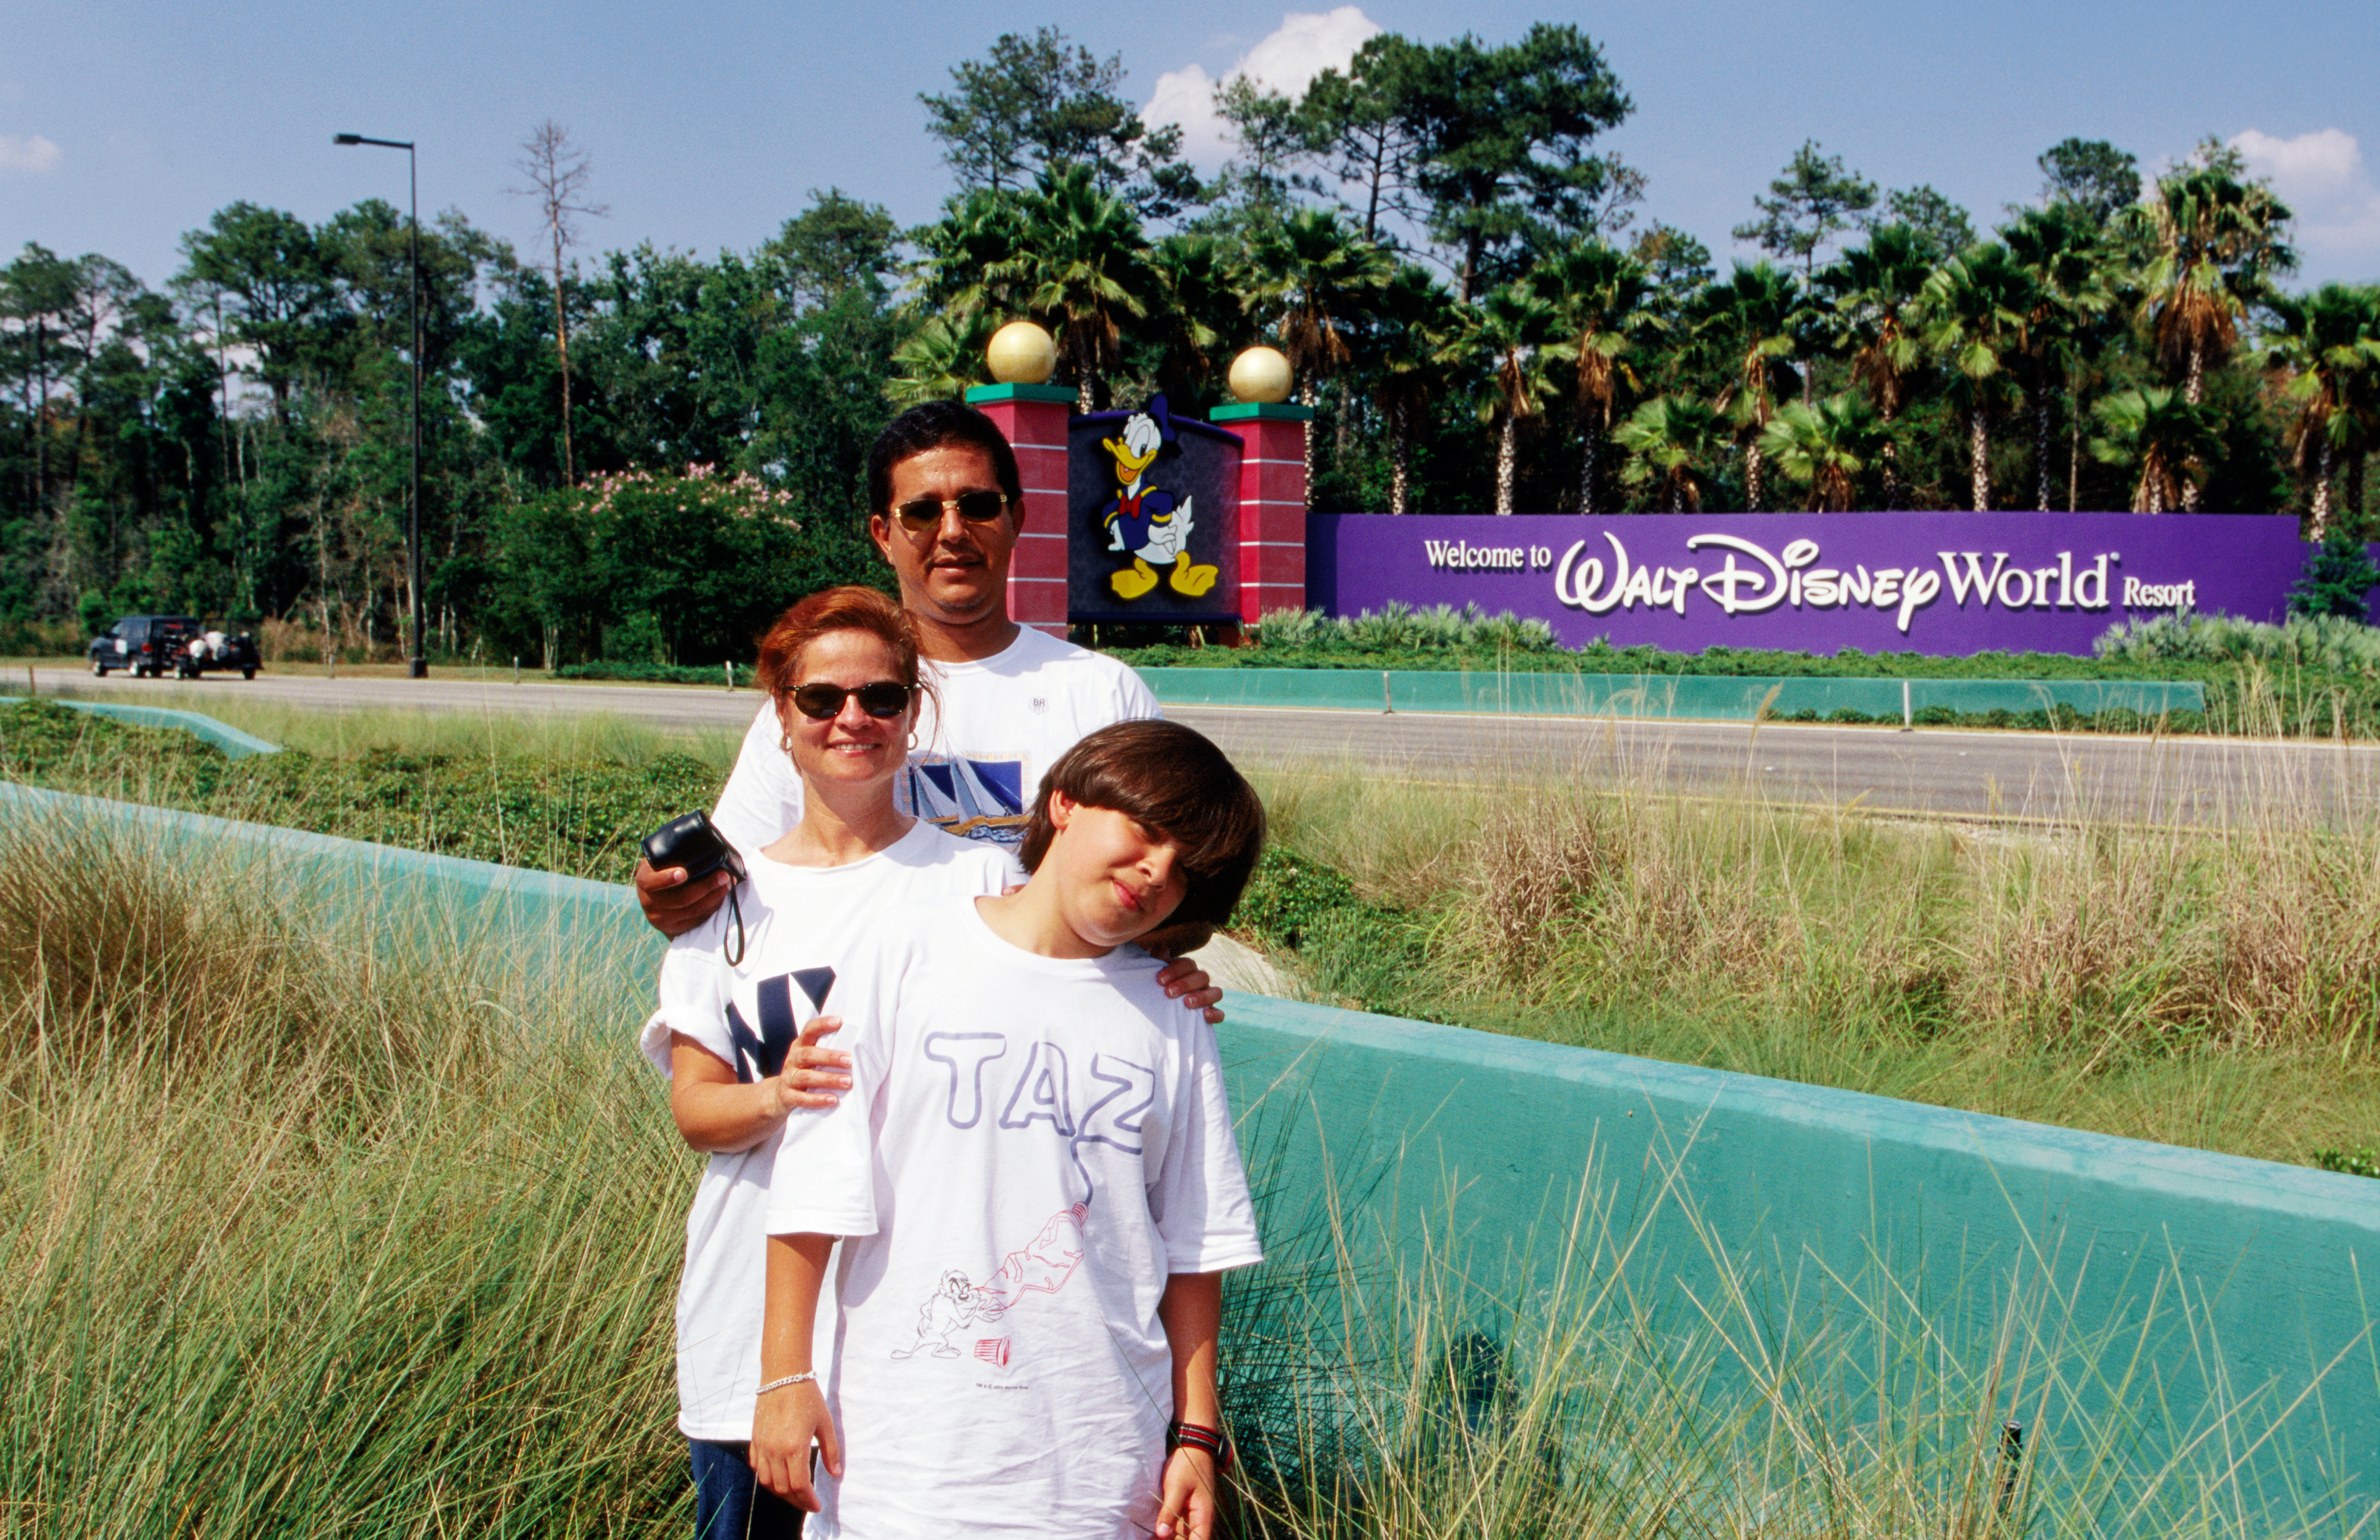 A family standing in front of the Walt Disney World sign